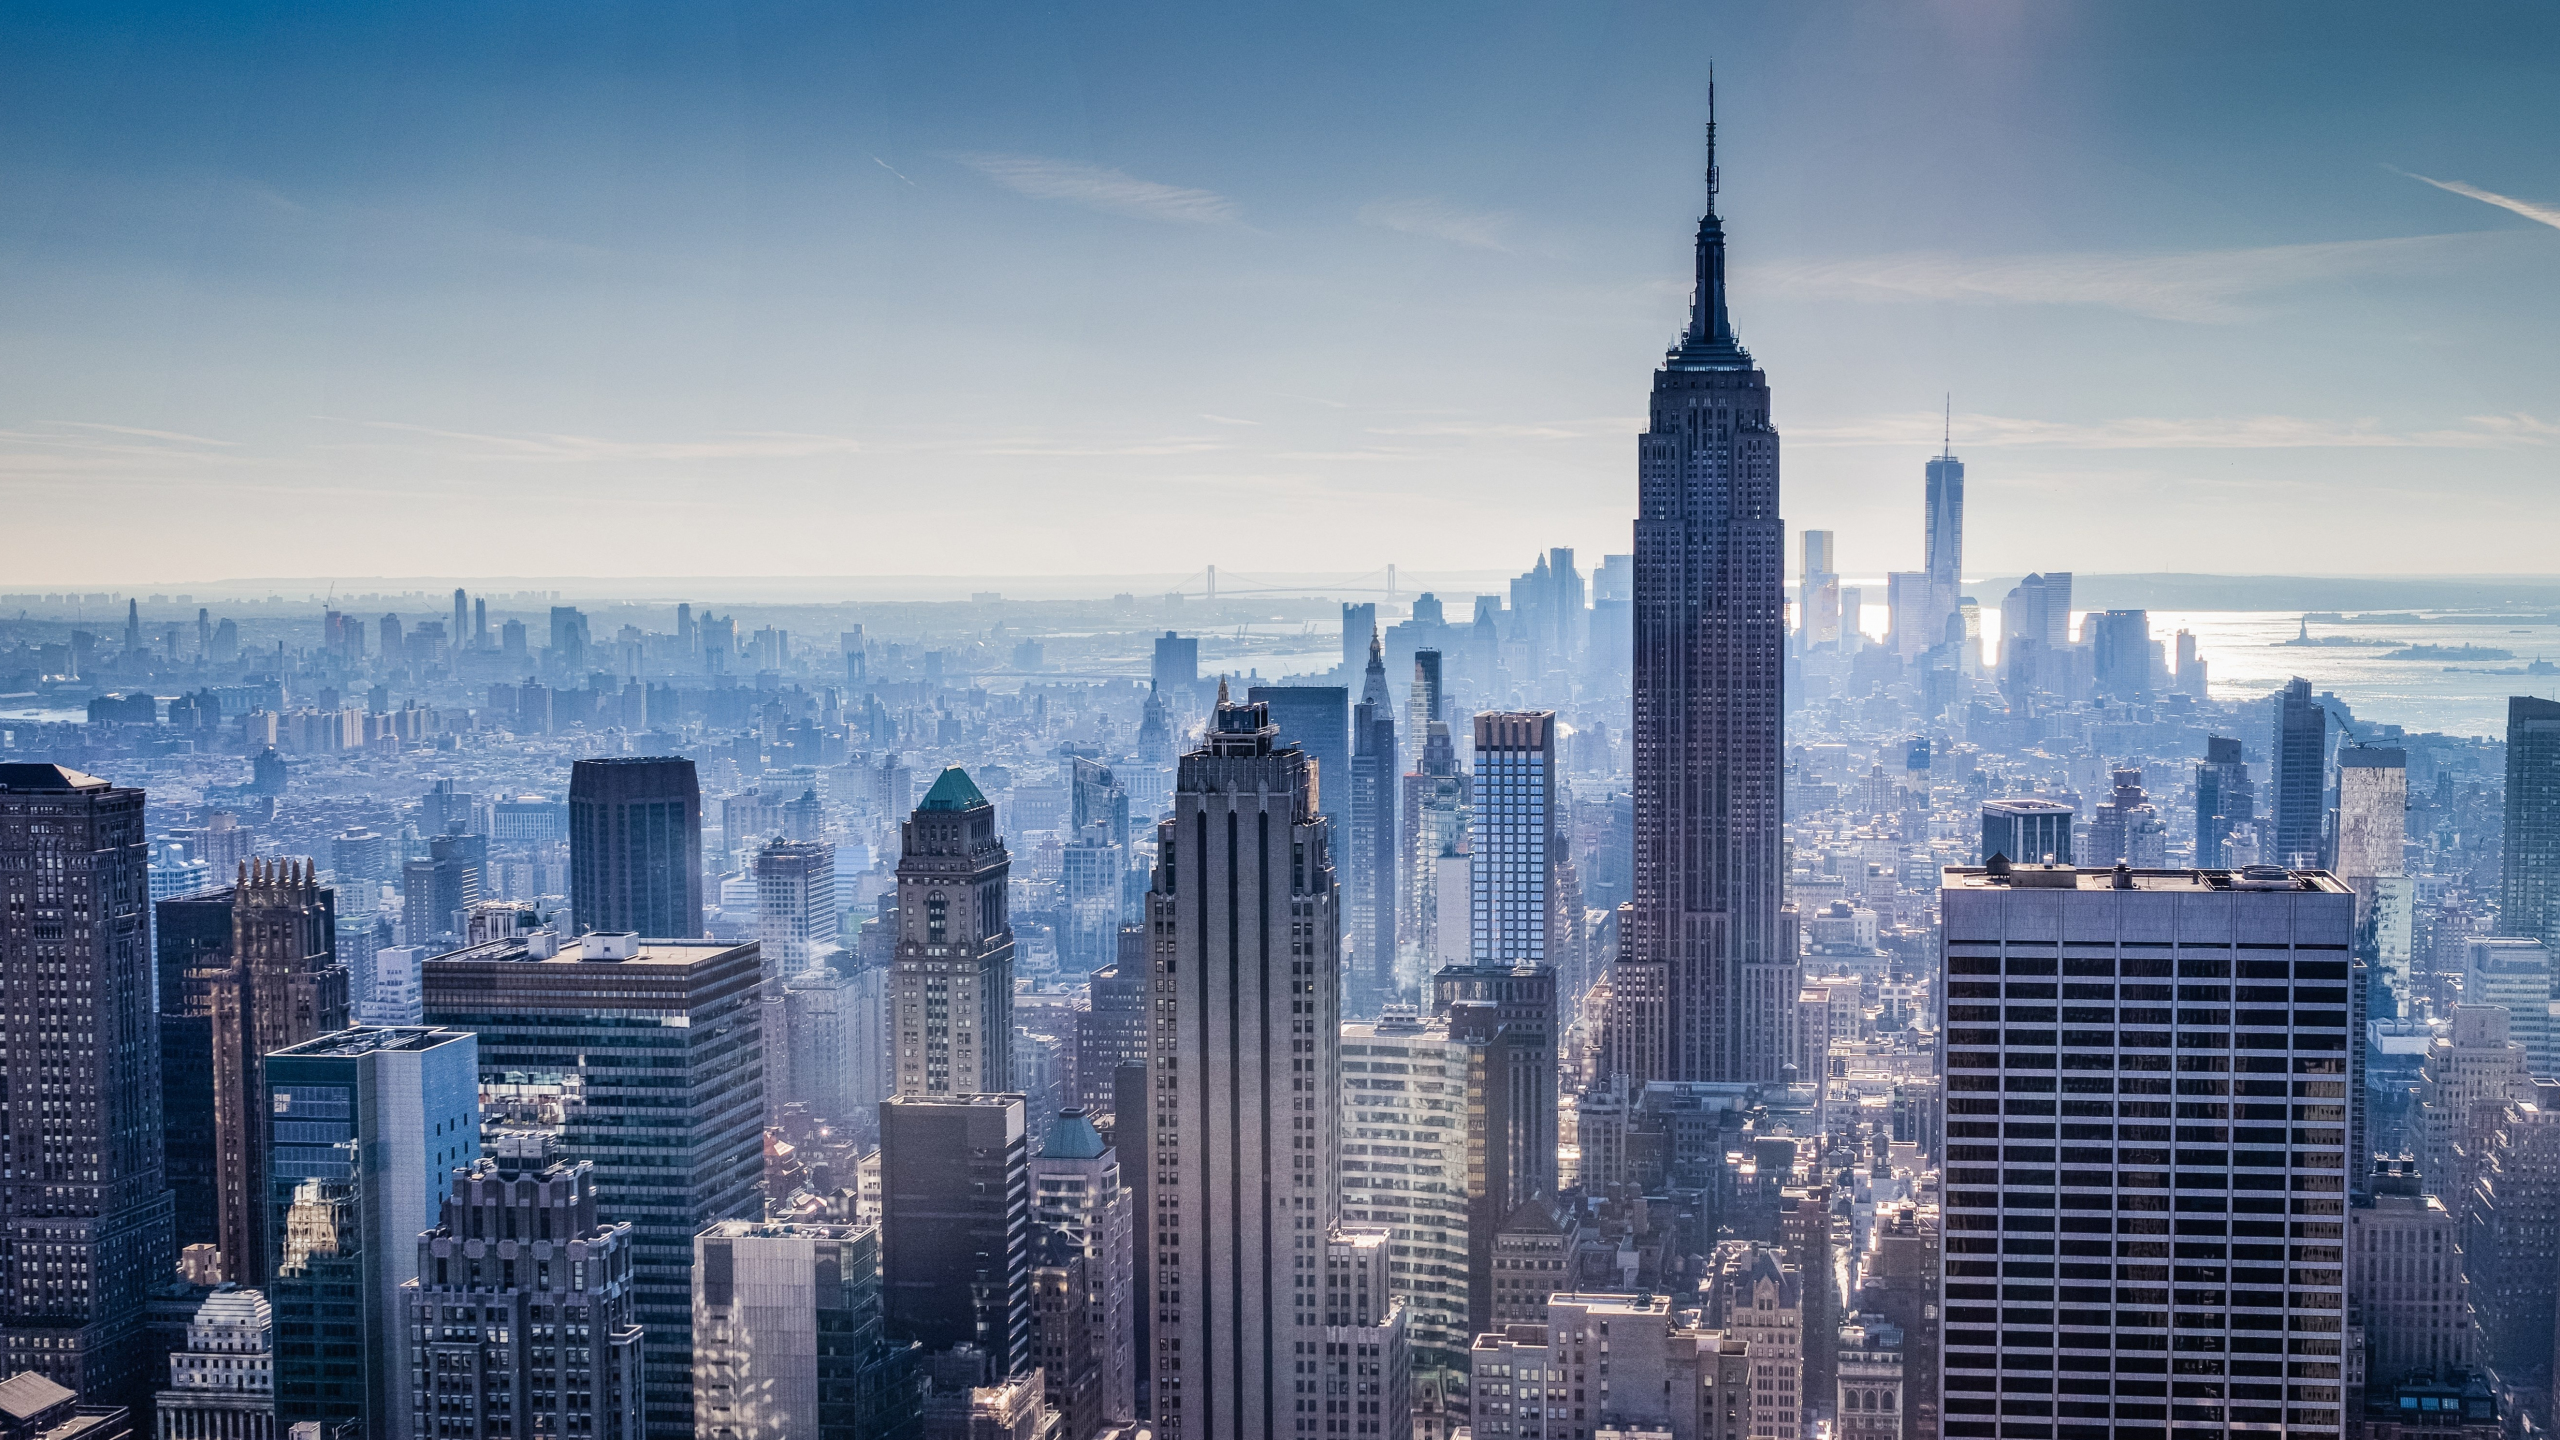 Download wallpaper 2560x1440 new york, city, skyscrapers, empire state  building, dual wide 16:9 2560x1440 hd background, 7758